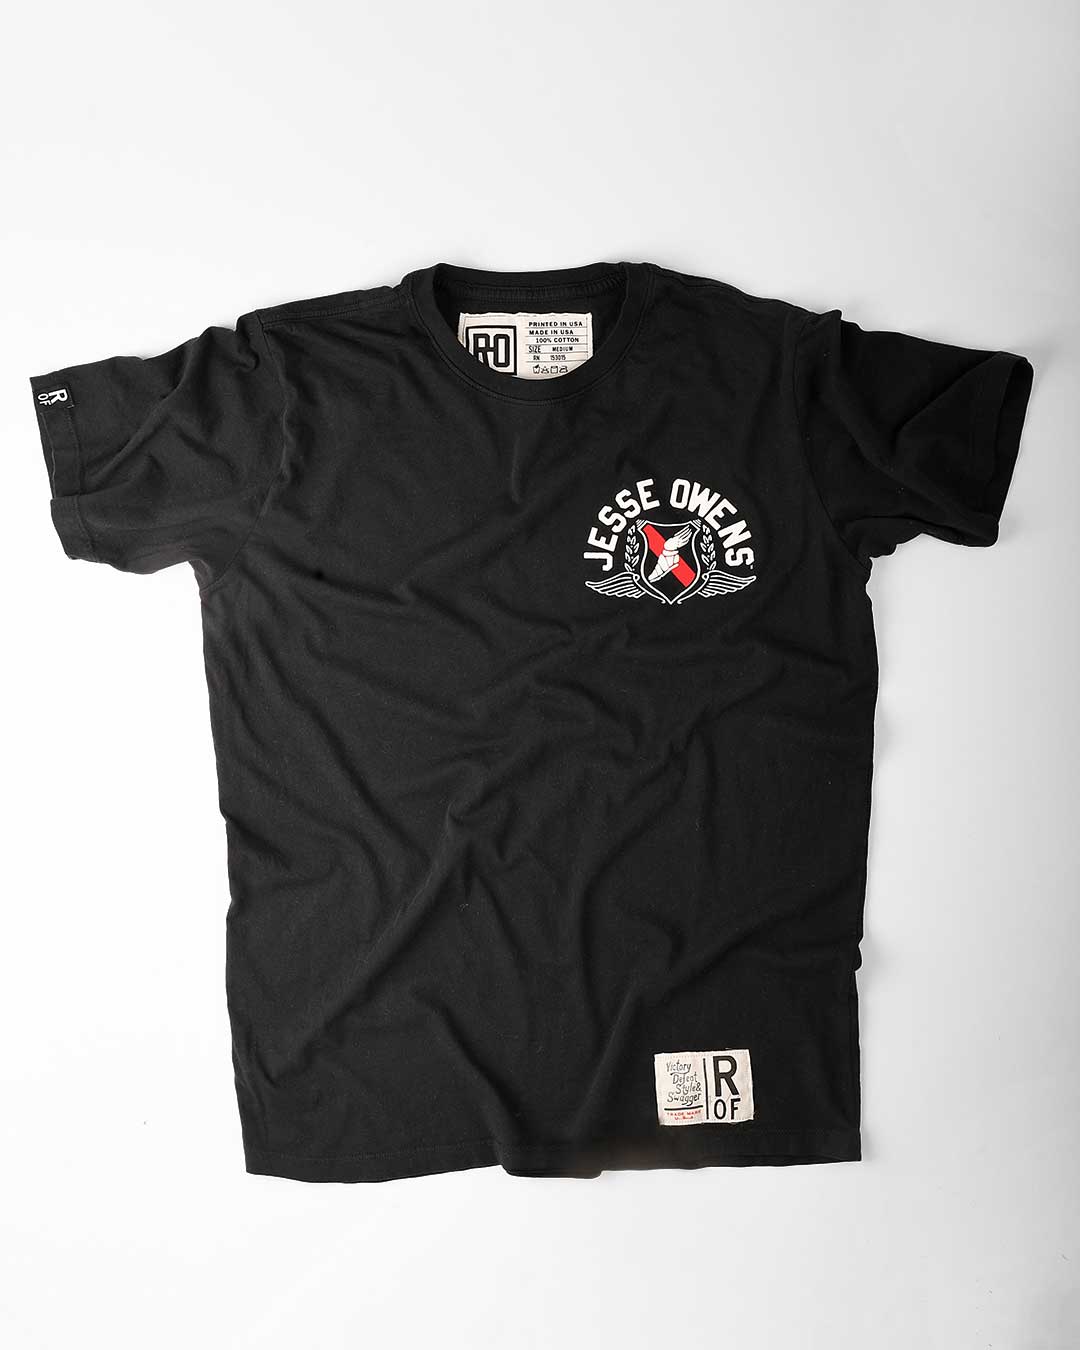 Jesse Owens The Buckeye Bullet Black Tee - Roots of Fight Canada